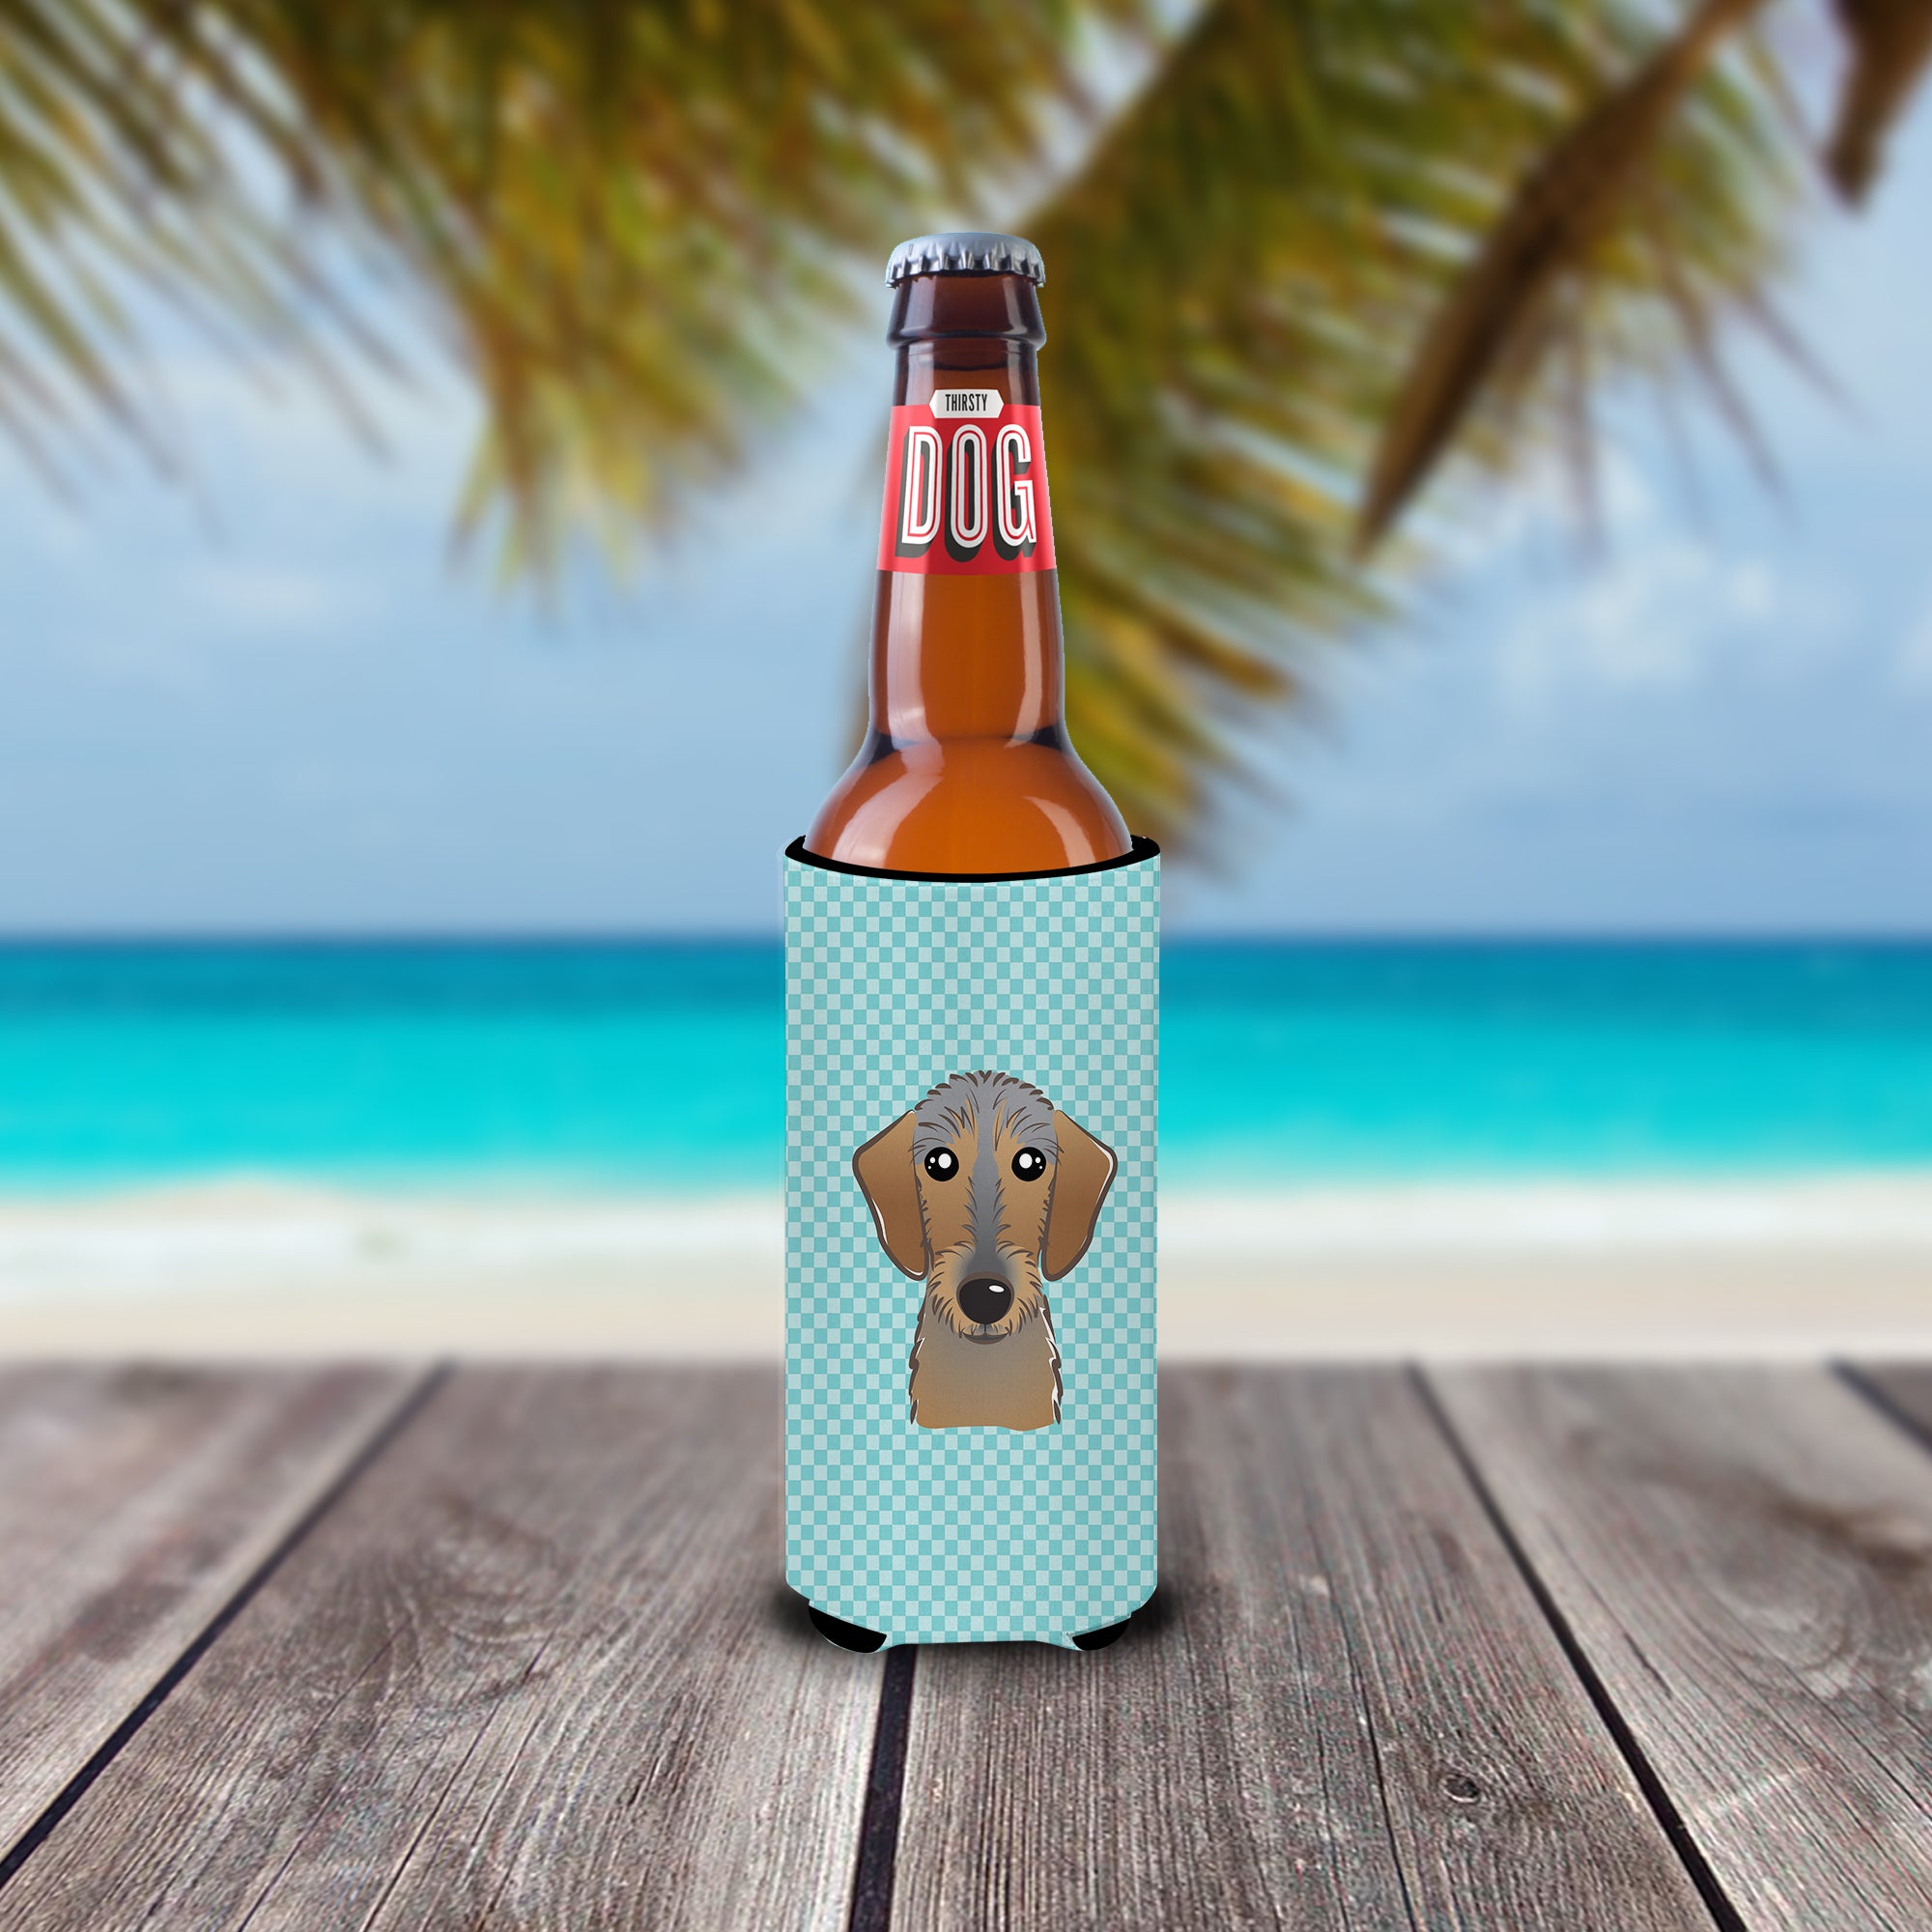 Checkerboard Blue Wirehaired Dachshund Ultra Beverage Insulators for slim cans